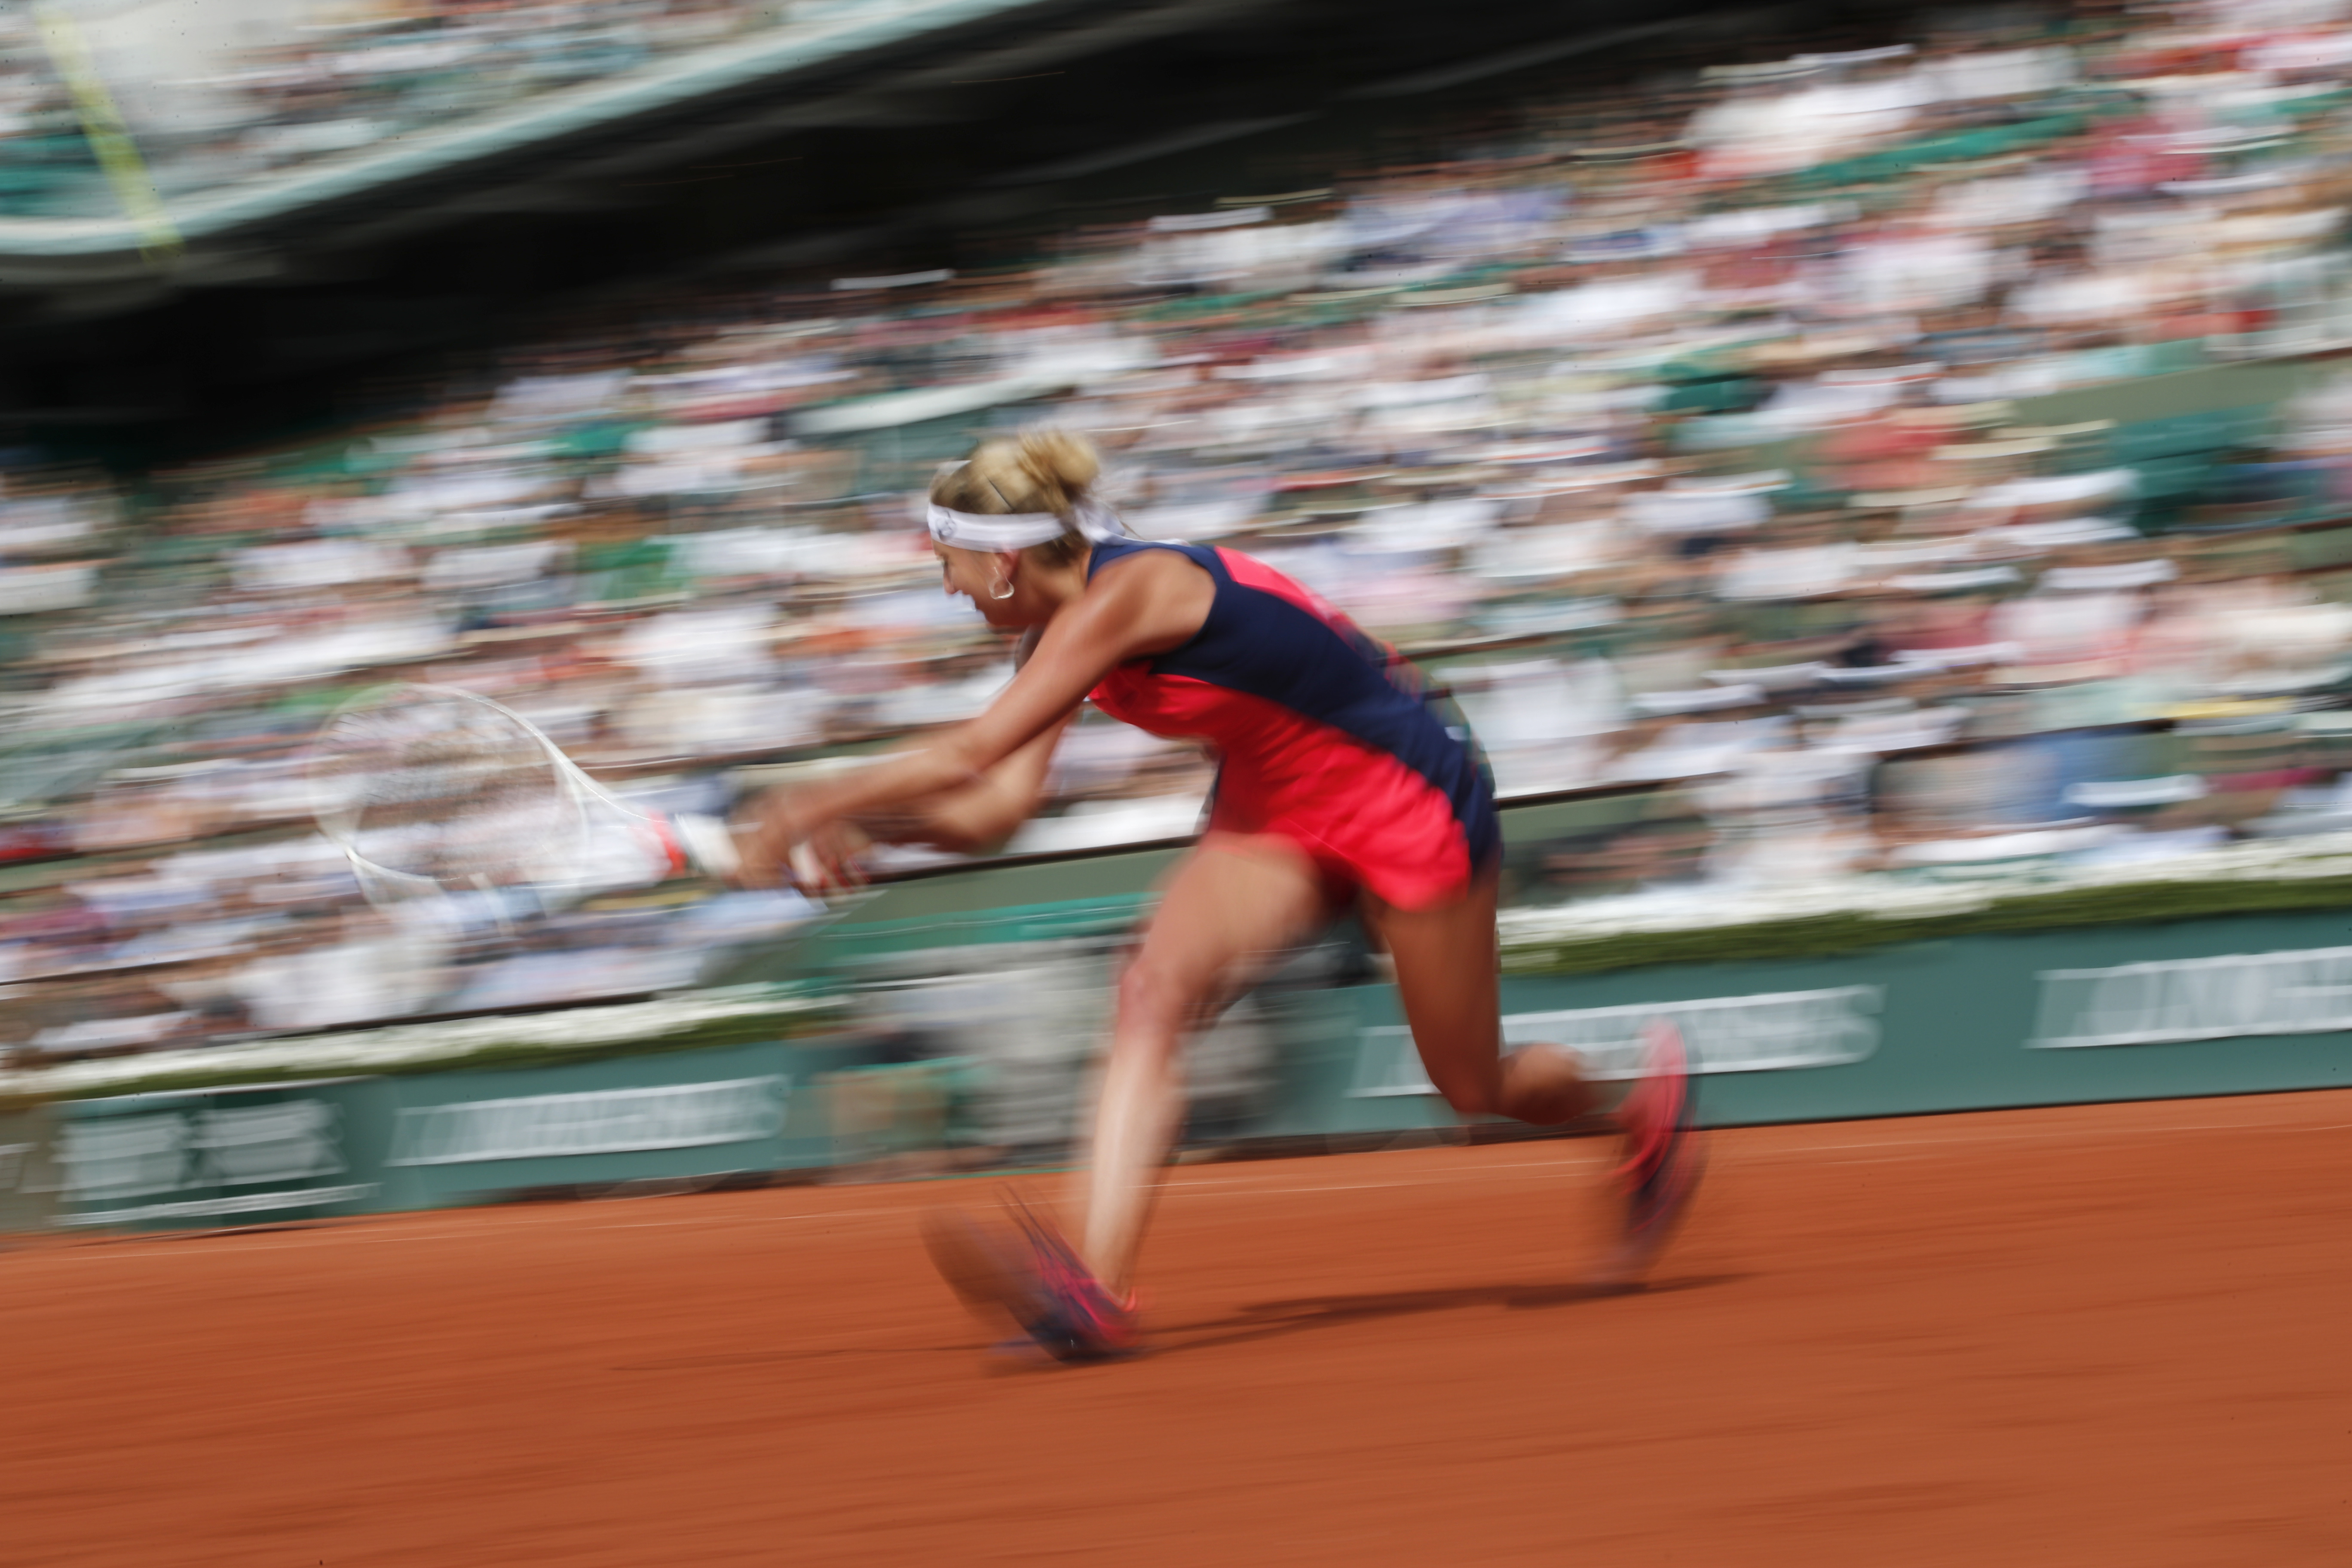 Timea Bacsinszky of Switzerland plays a shot against Venus Williams of the U.S. during their fourth round match of the French Open tennis tournament at the Roland Garros stadium, in Paris, France. Sunday, June 4, 2017. (AP Photo/Christophe Ena)